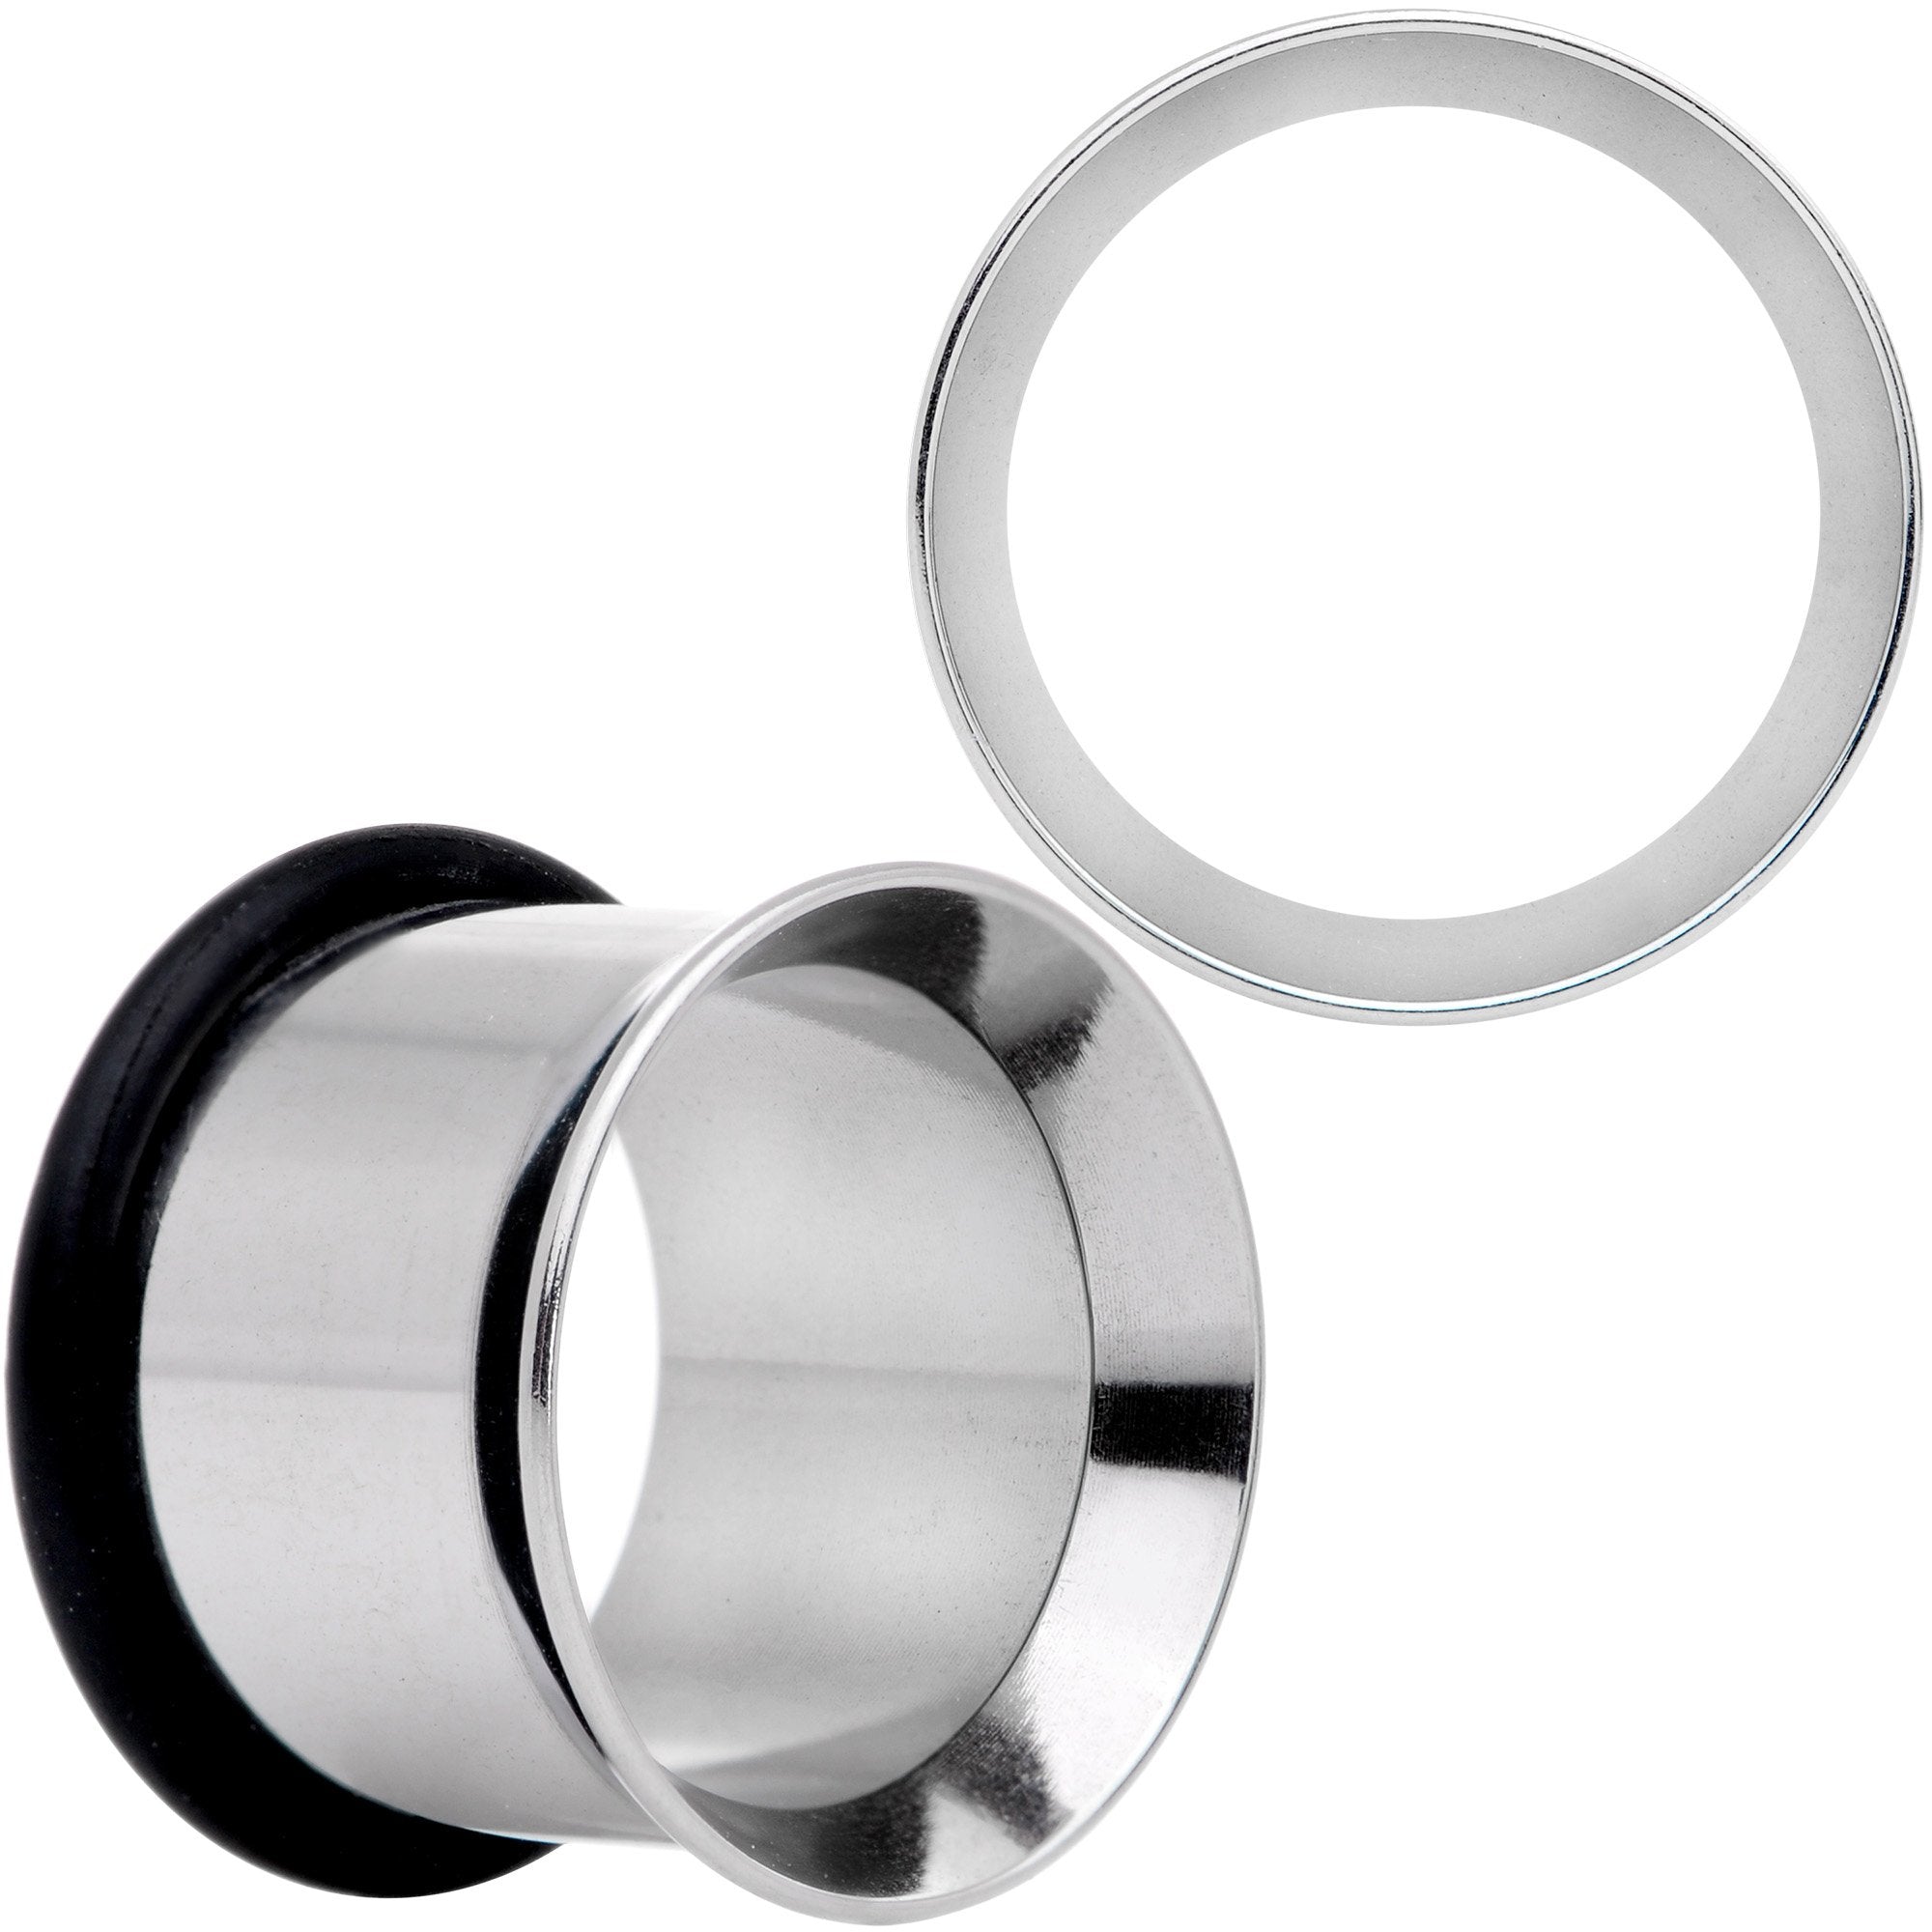 Stainless Steel Single Flare Tunnel Plug Set Available in Sizes  8 Gauge to 1